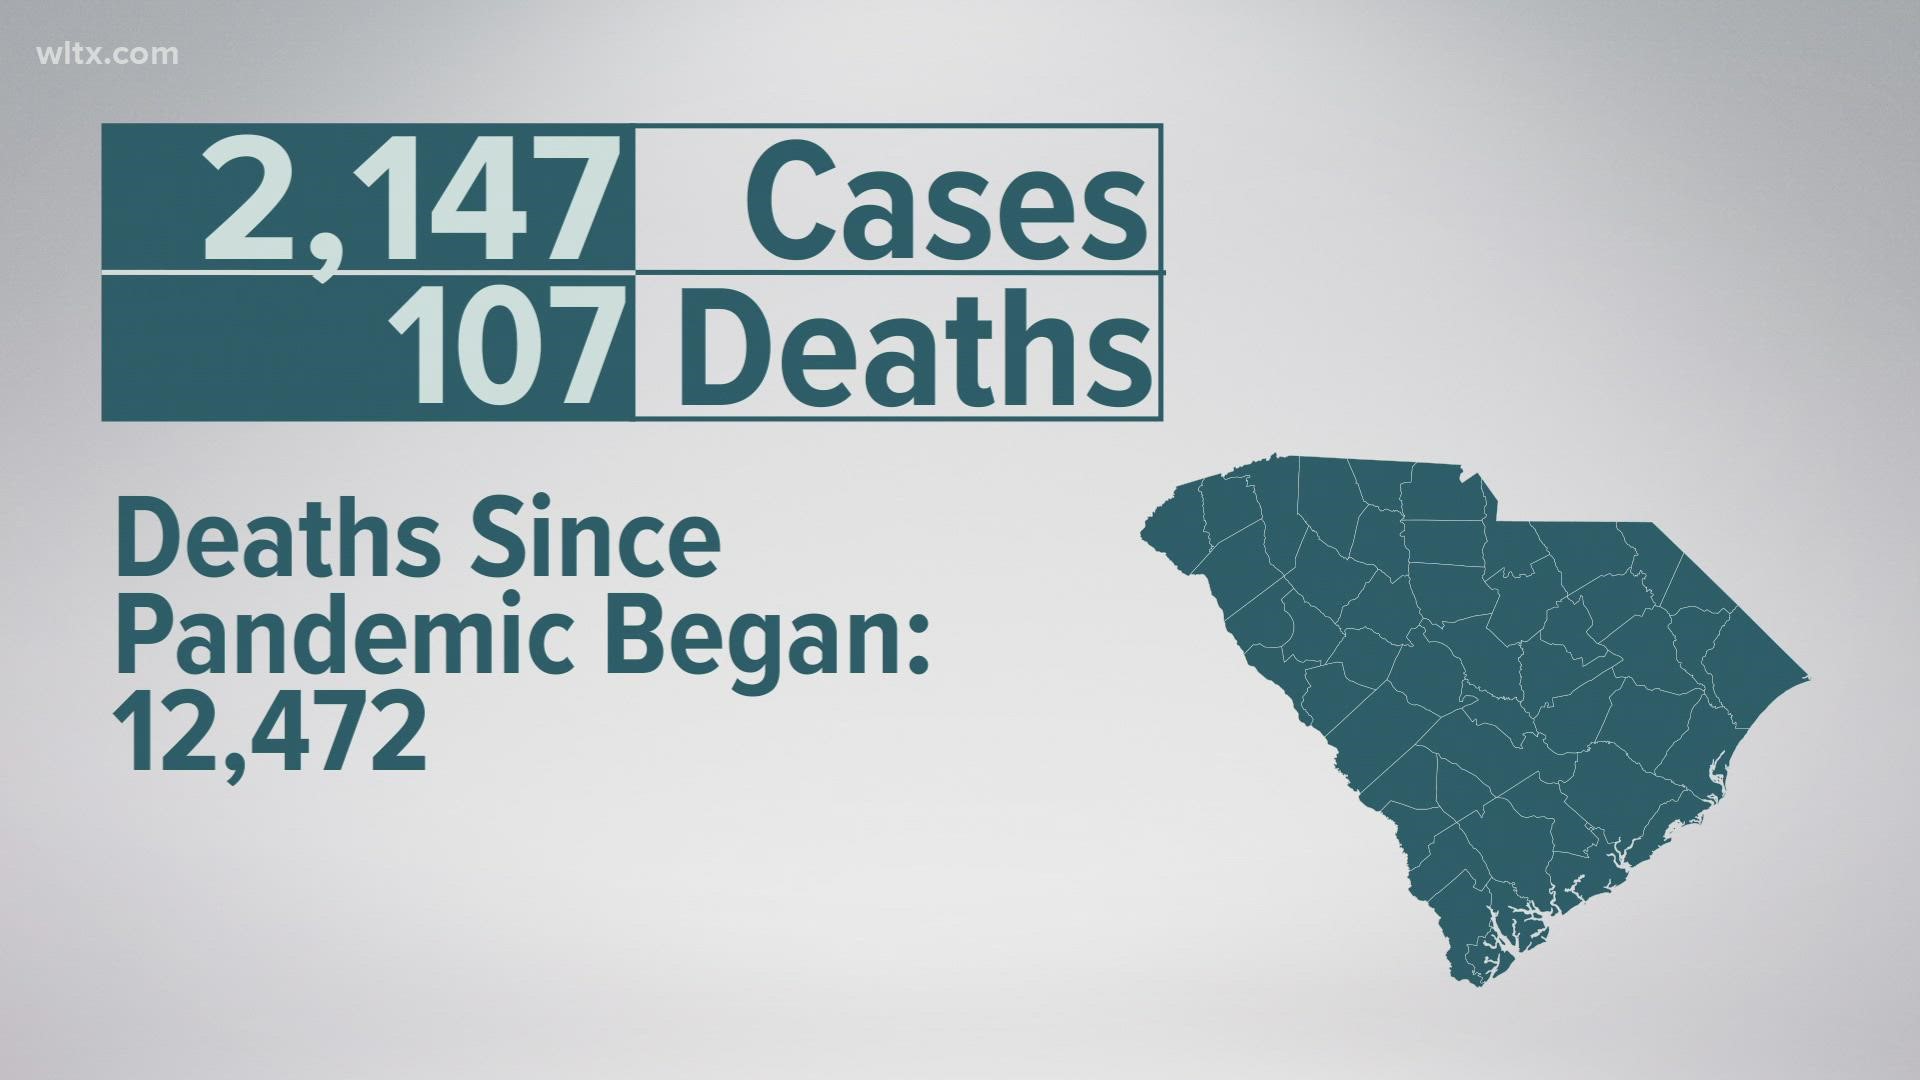 A look at COVID cases and deaths in South Carolina for Sept. 30, 2021